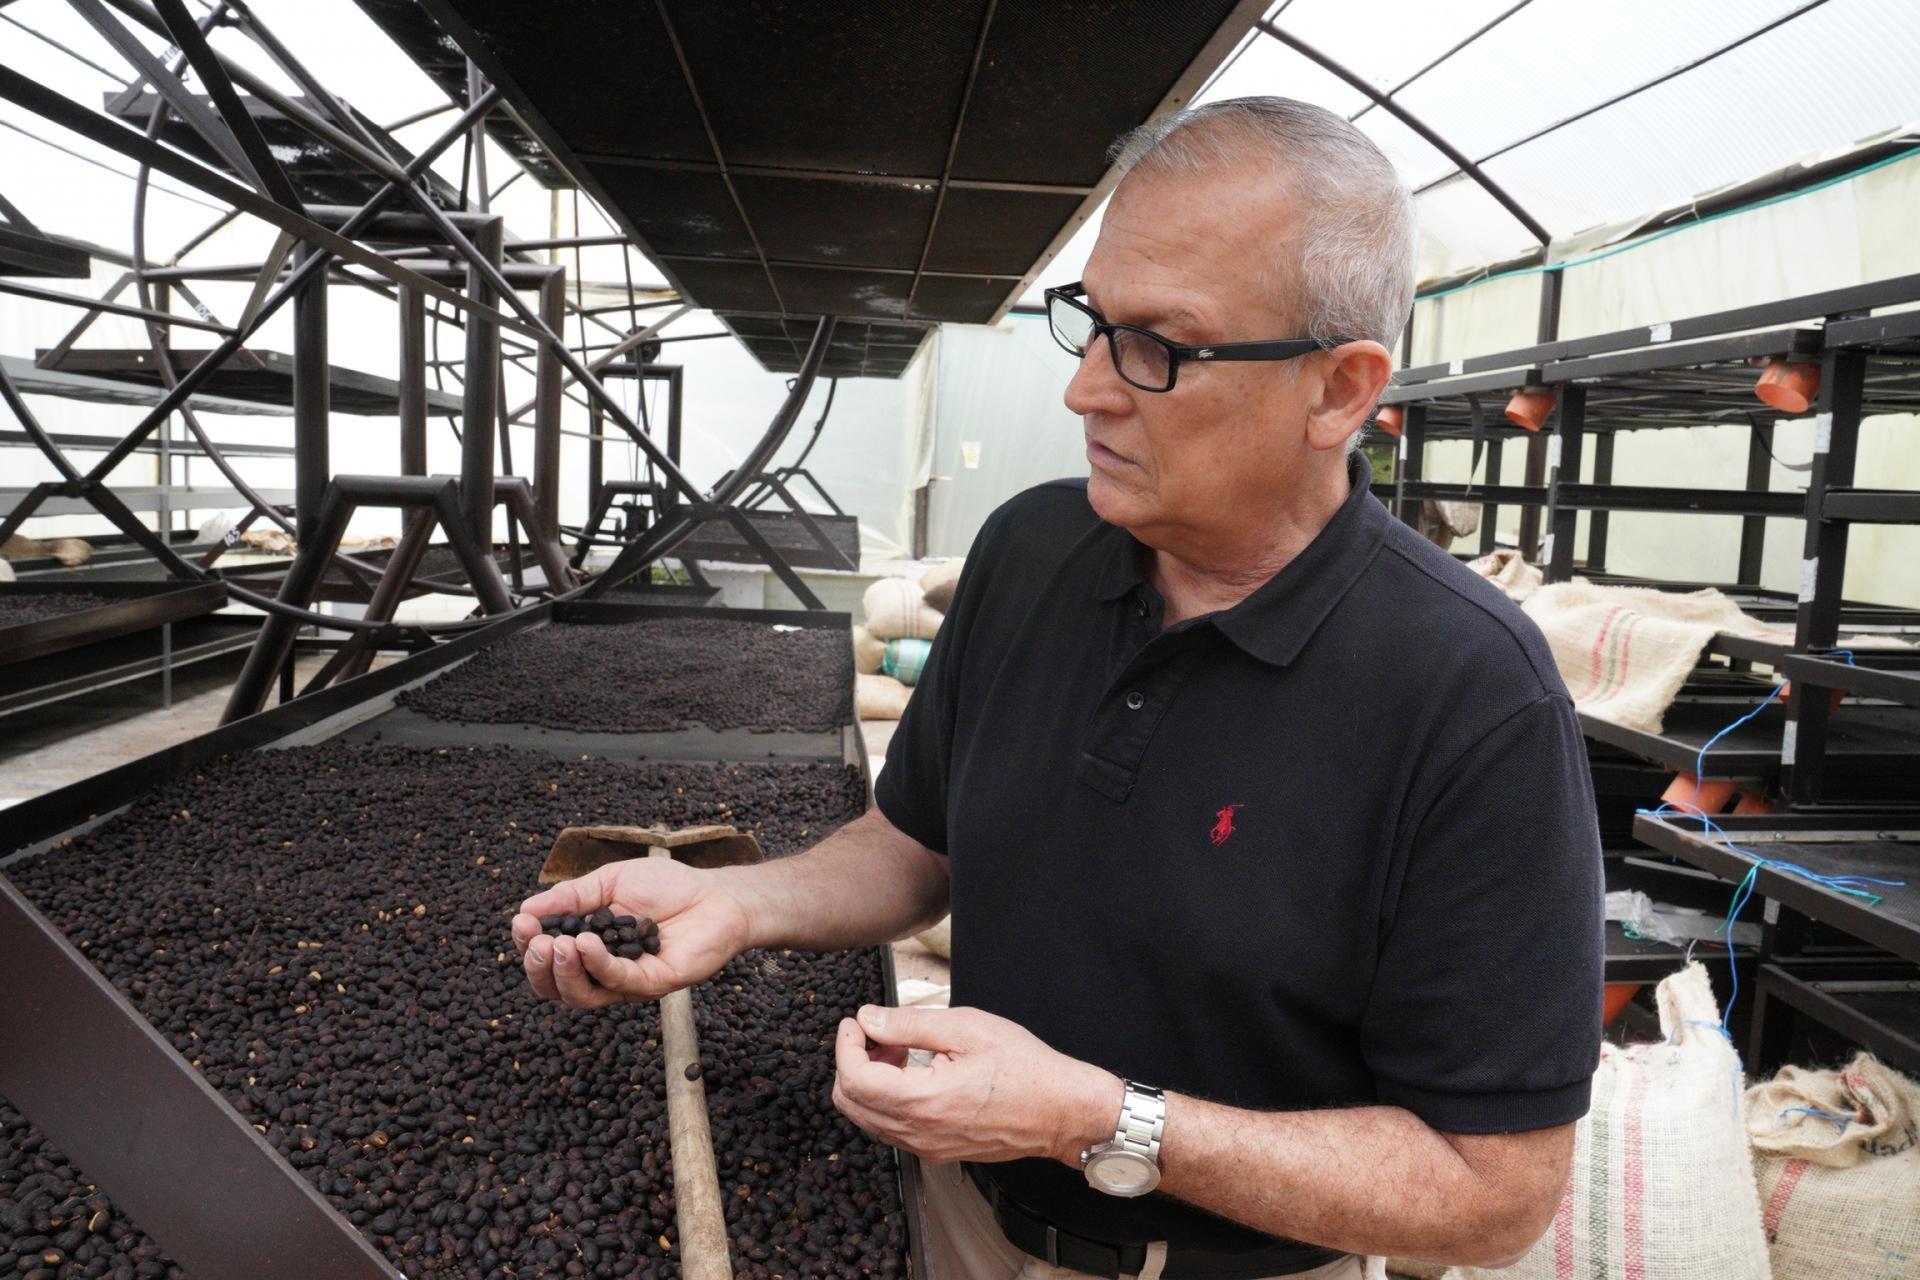 Mauricio Zuñiga checks out a batch of coffee beans that are being dried up at the Immaculada farm near Cali, Colombia, on May 27, 2021.